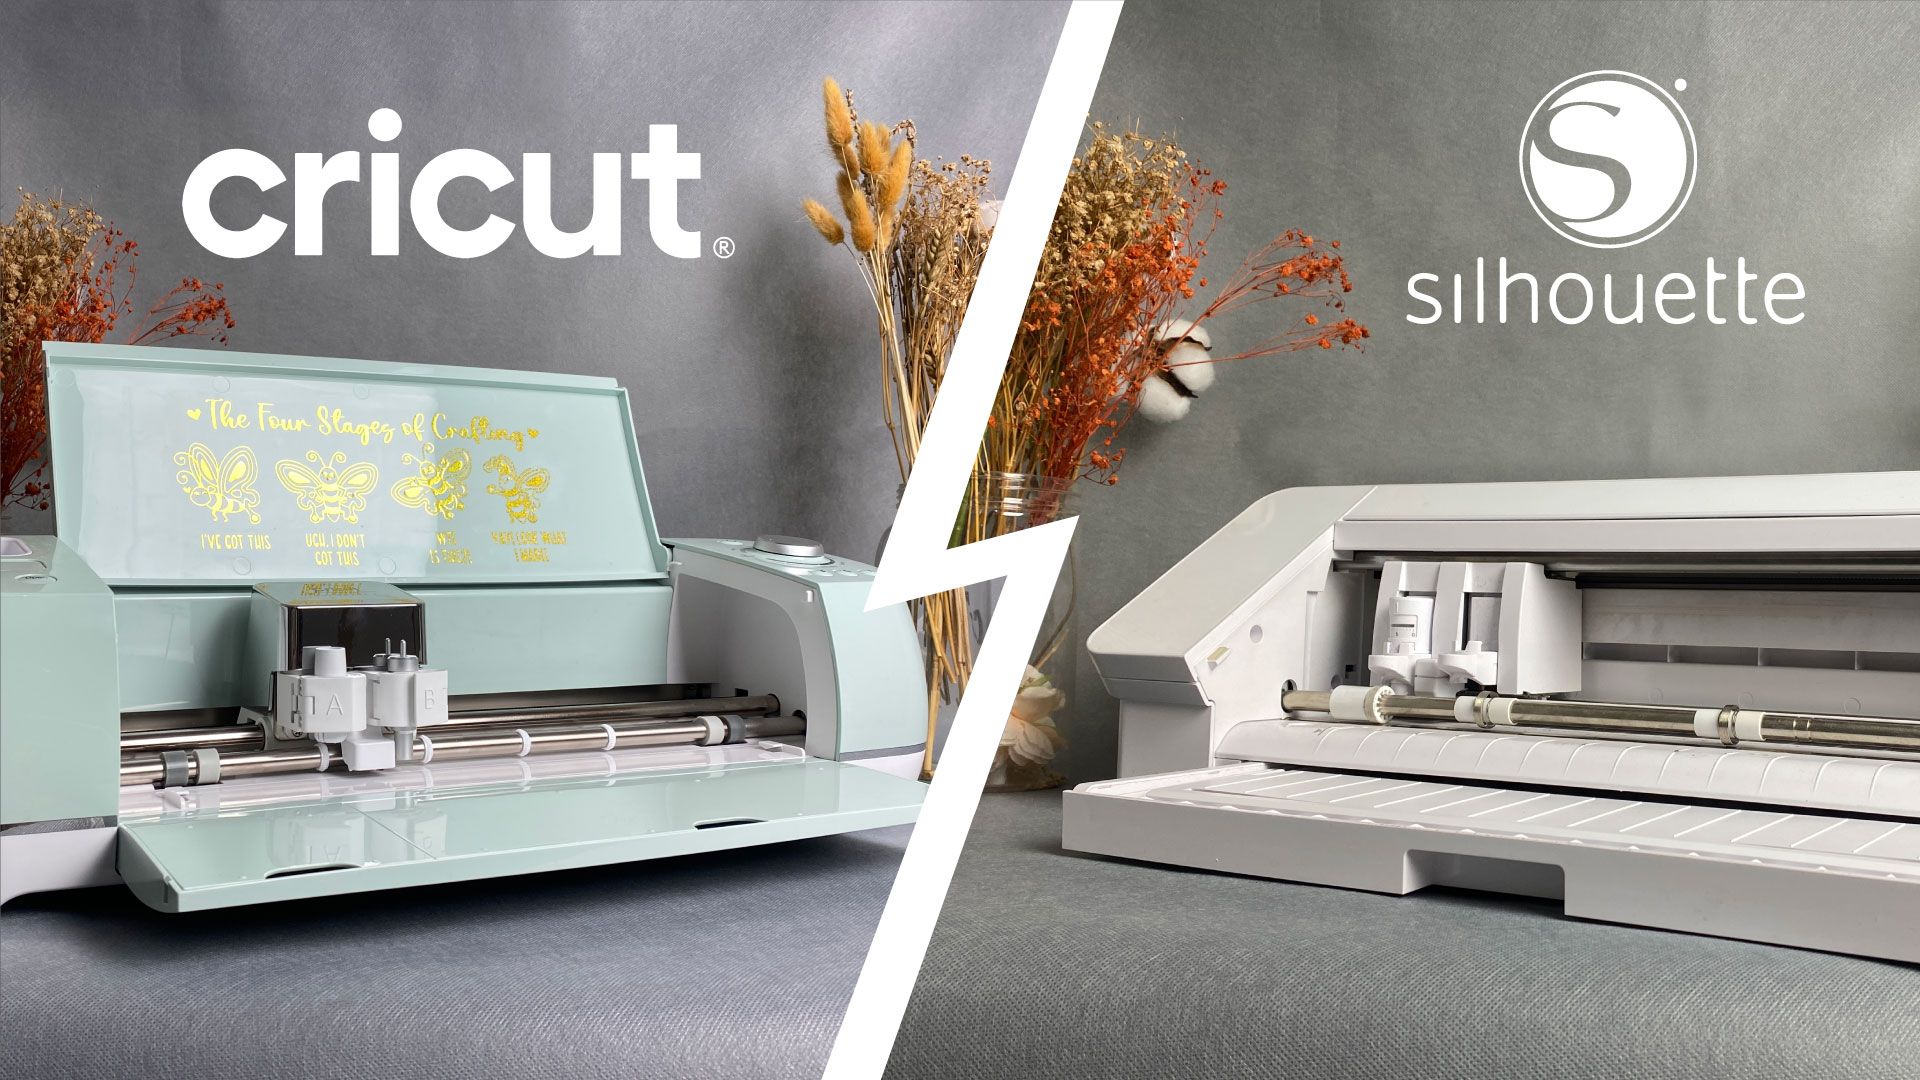 Cricut vs Silhouette Which is Better Right Now